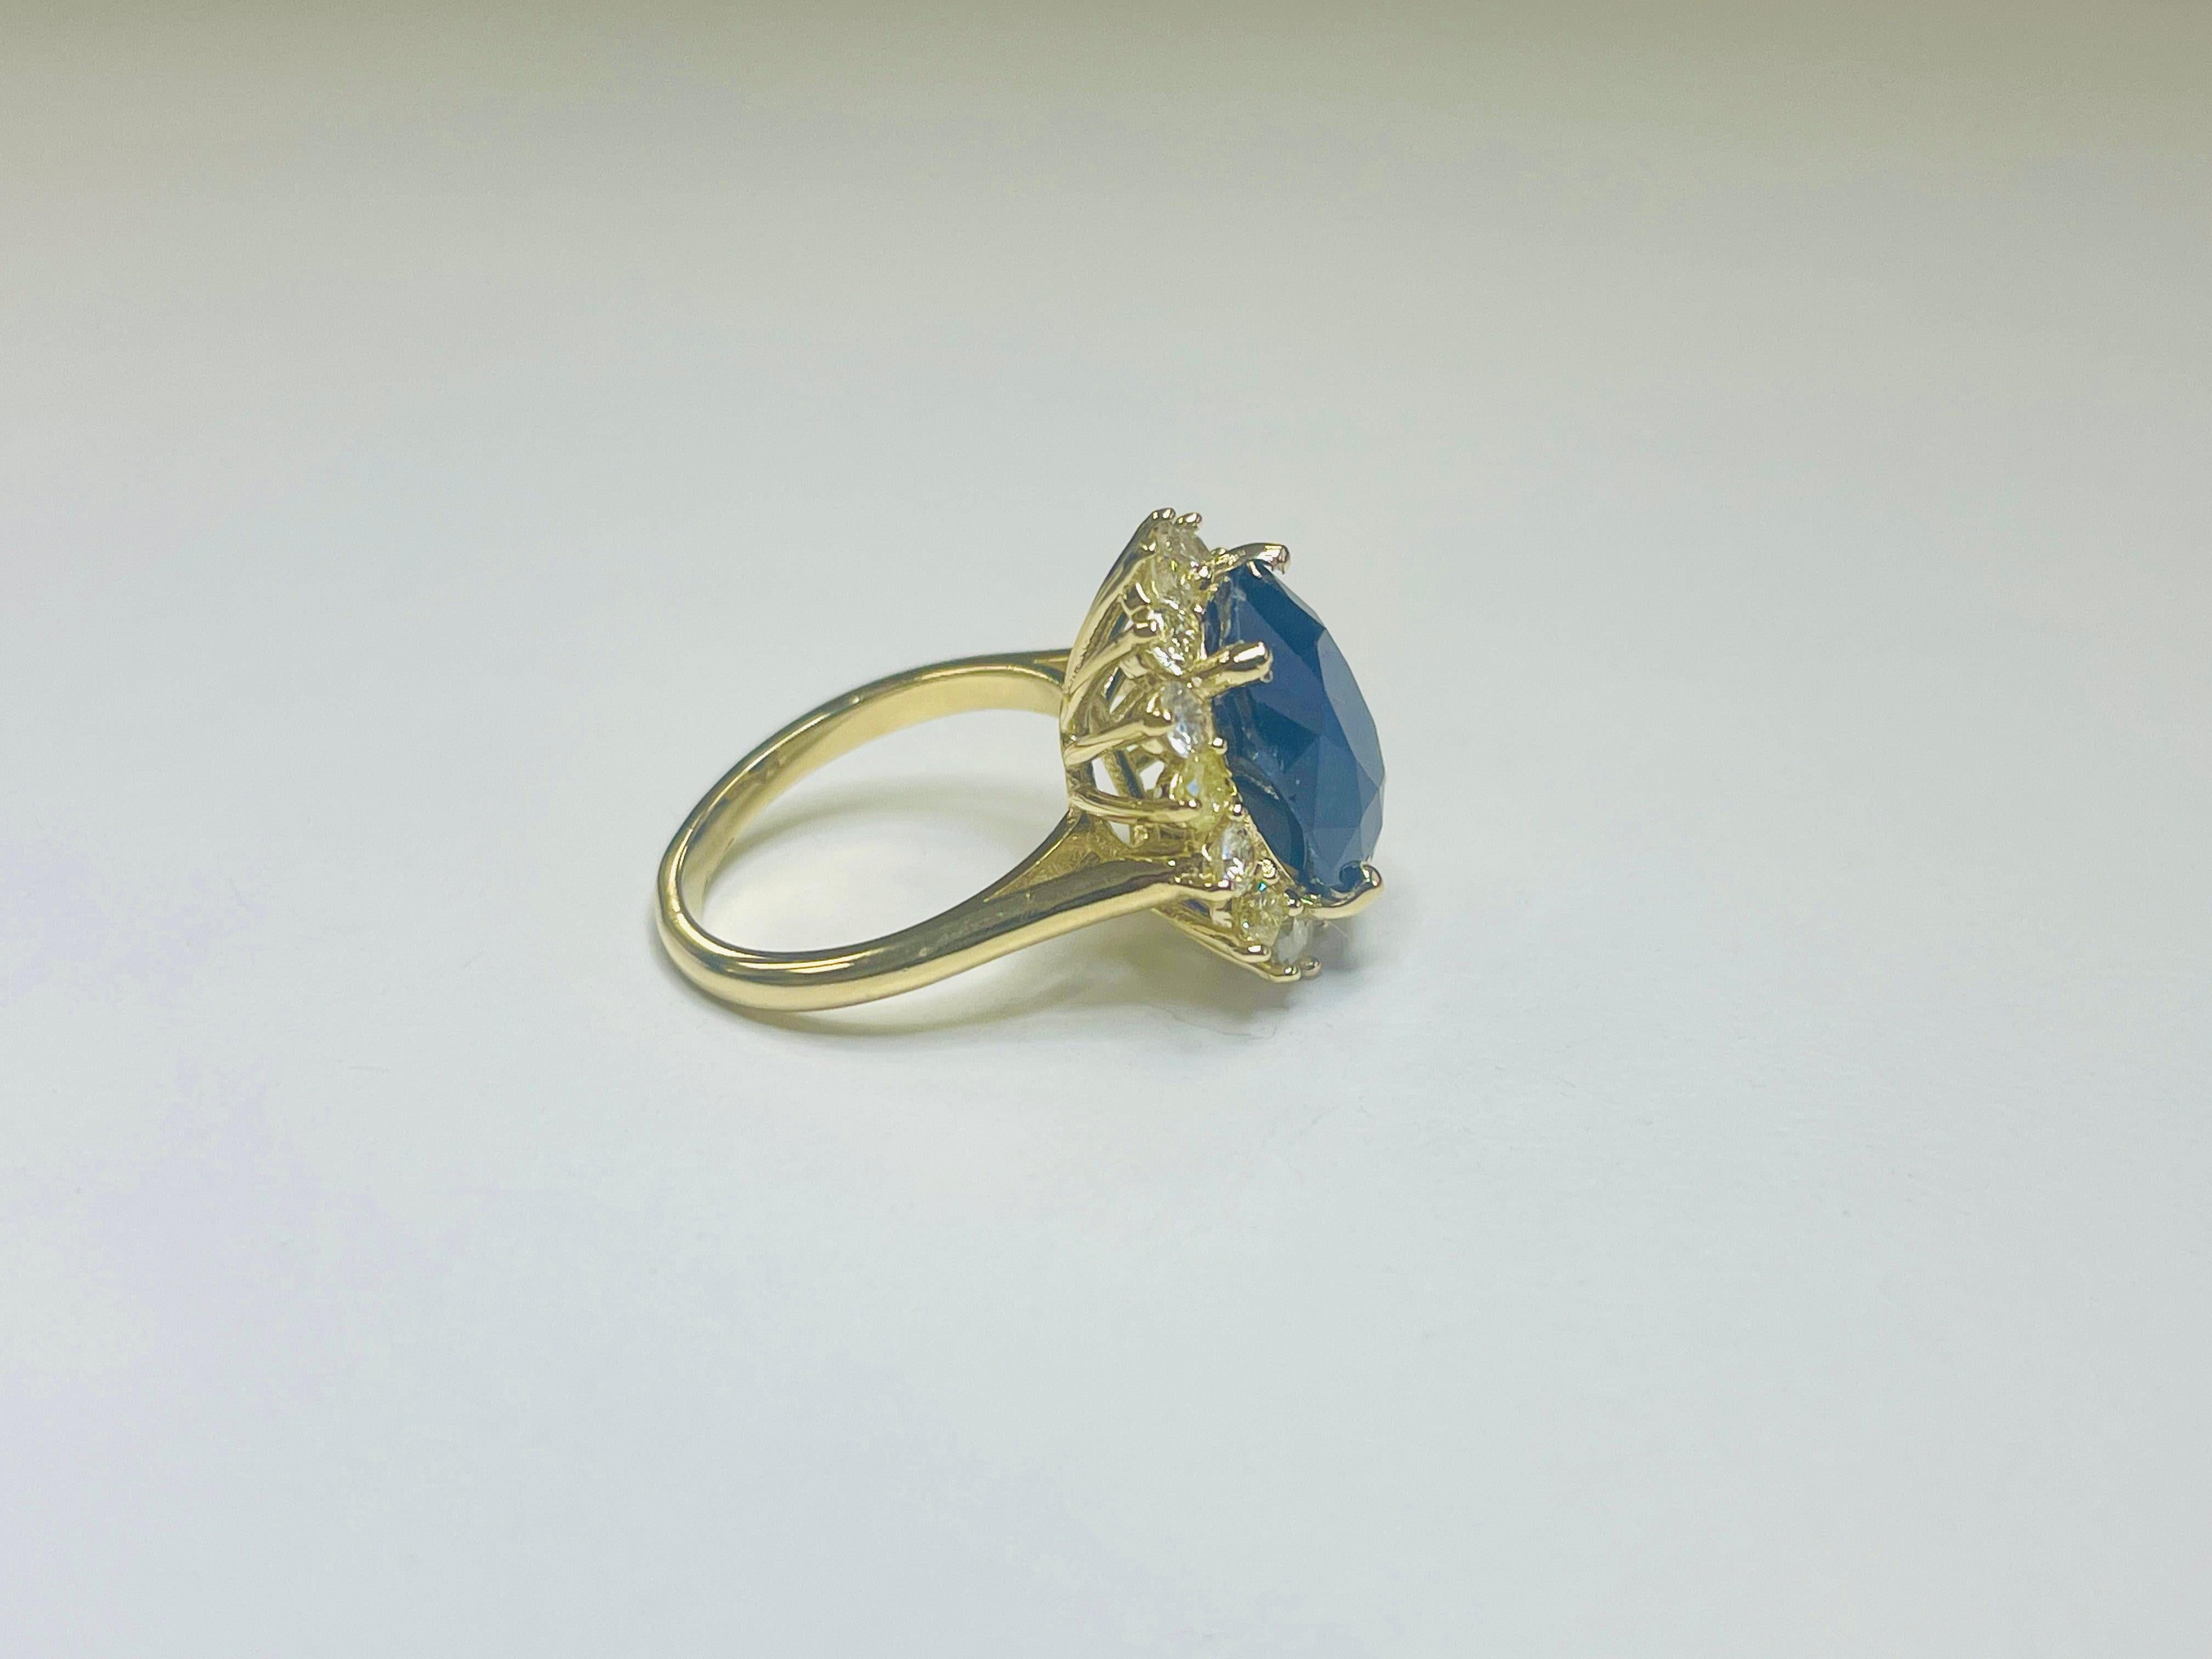 8.71 Carat Intense Blue Oval Cut Natural Sapphire 14K Yellow Gold Diamond Ring For Sale 1